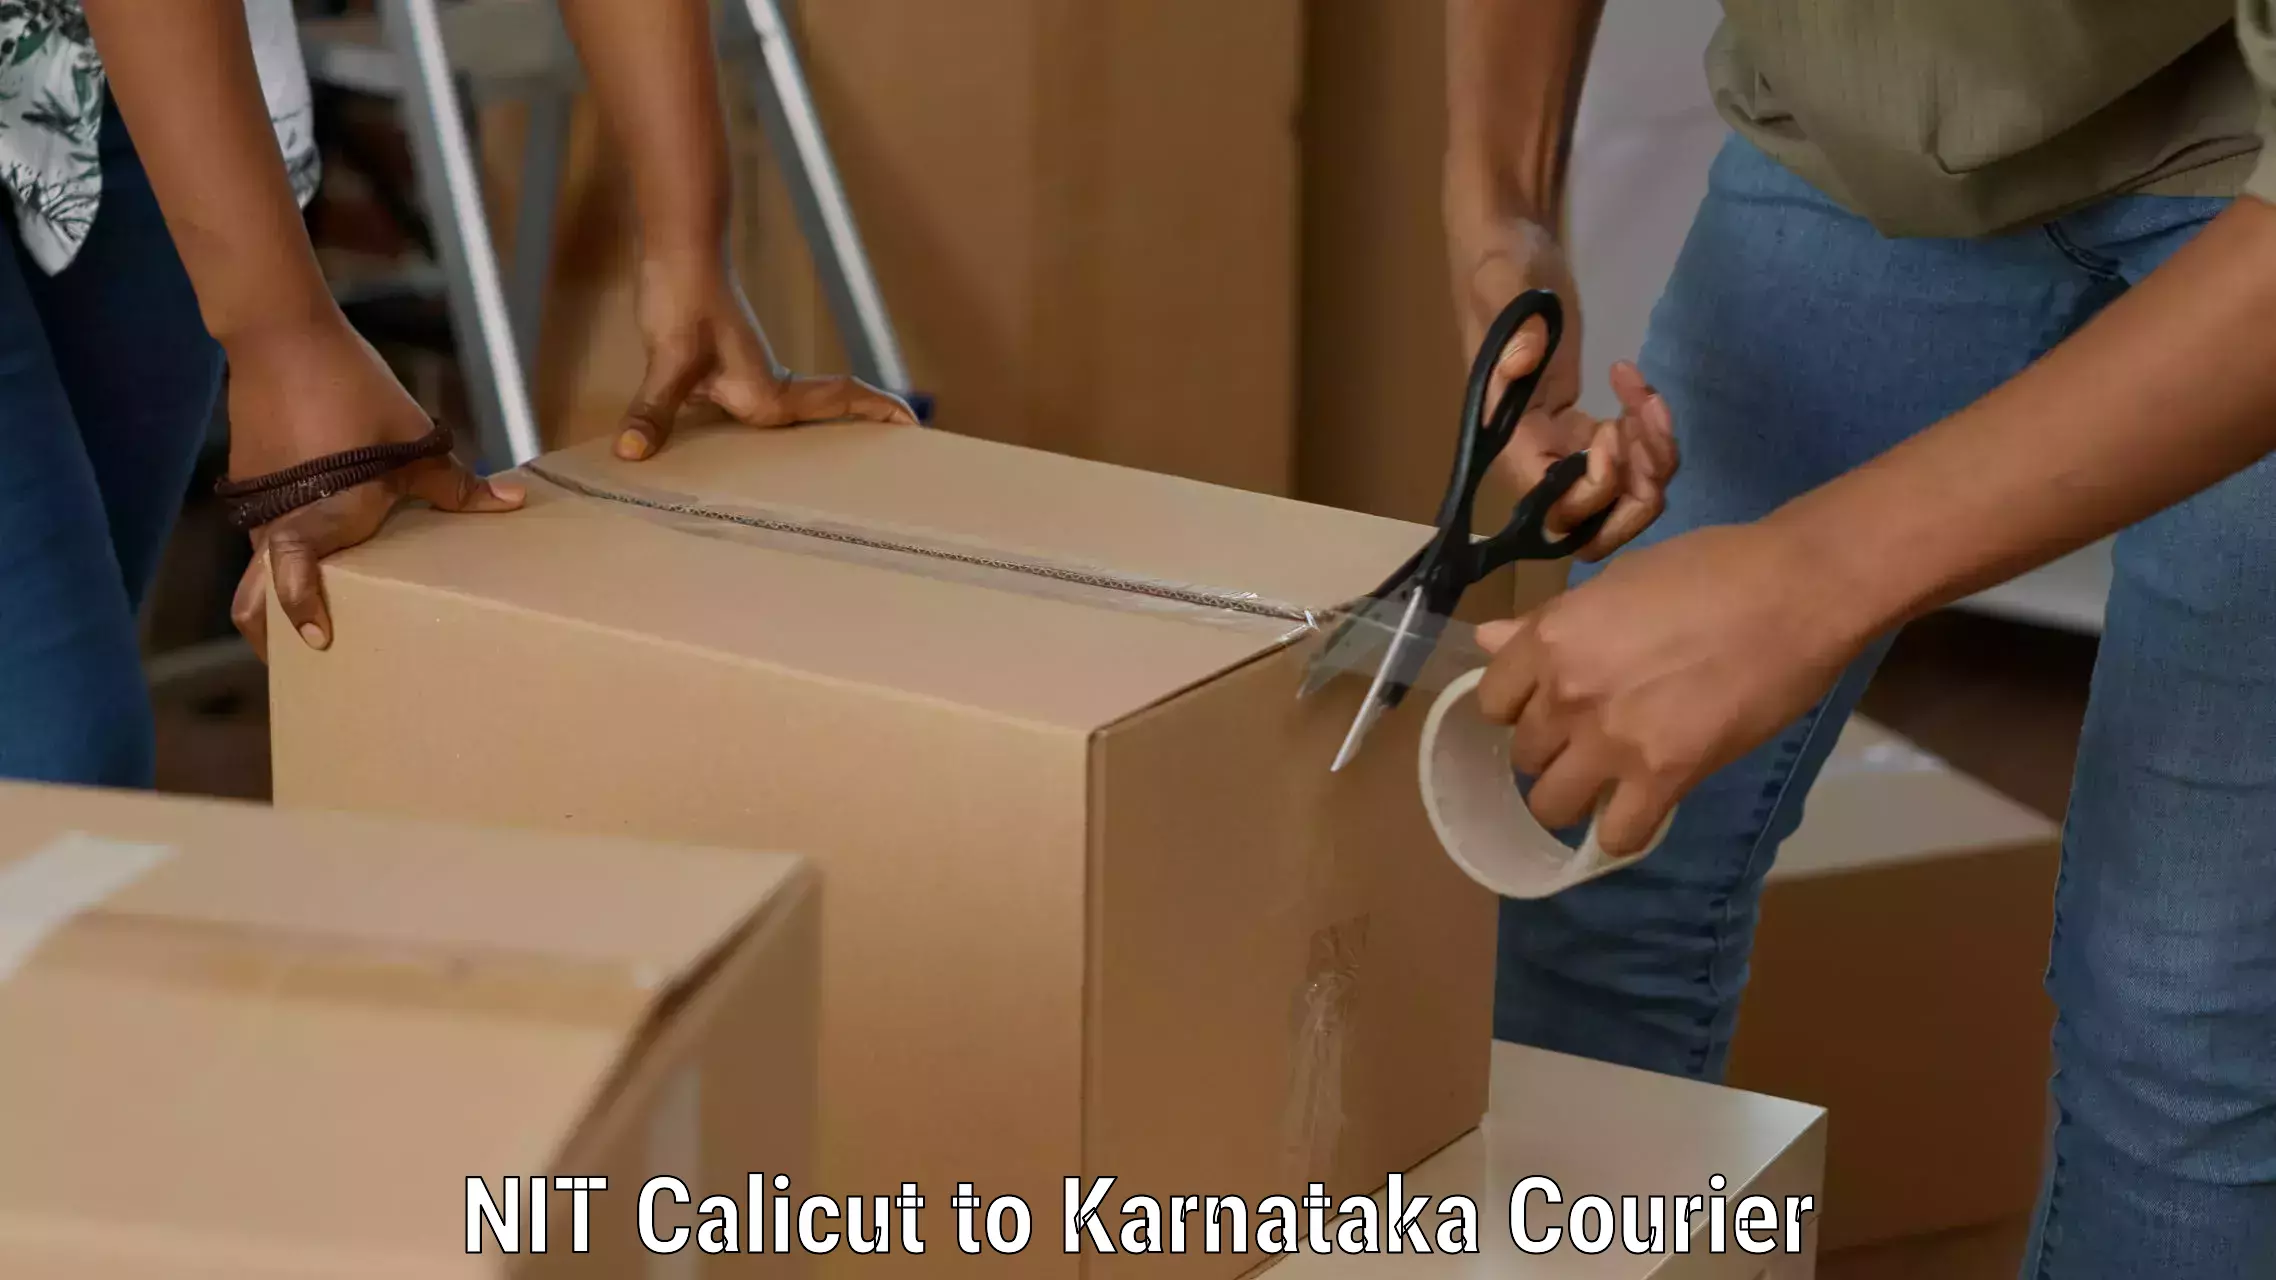 Reliable courier service NIT Calicut to Bengaluru